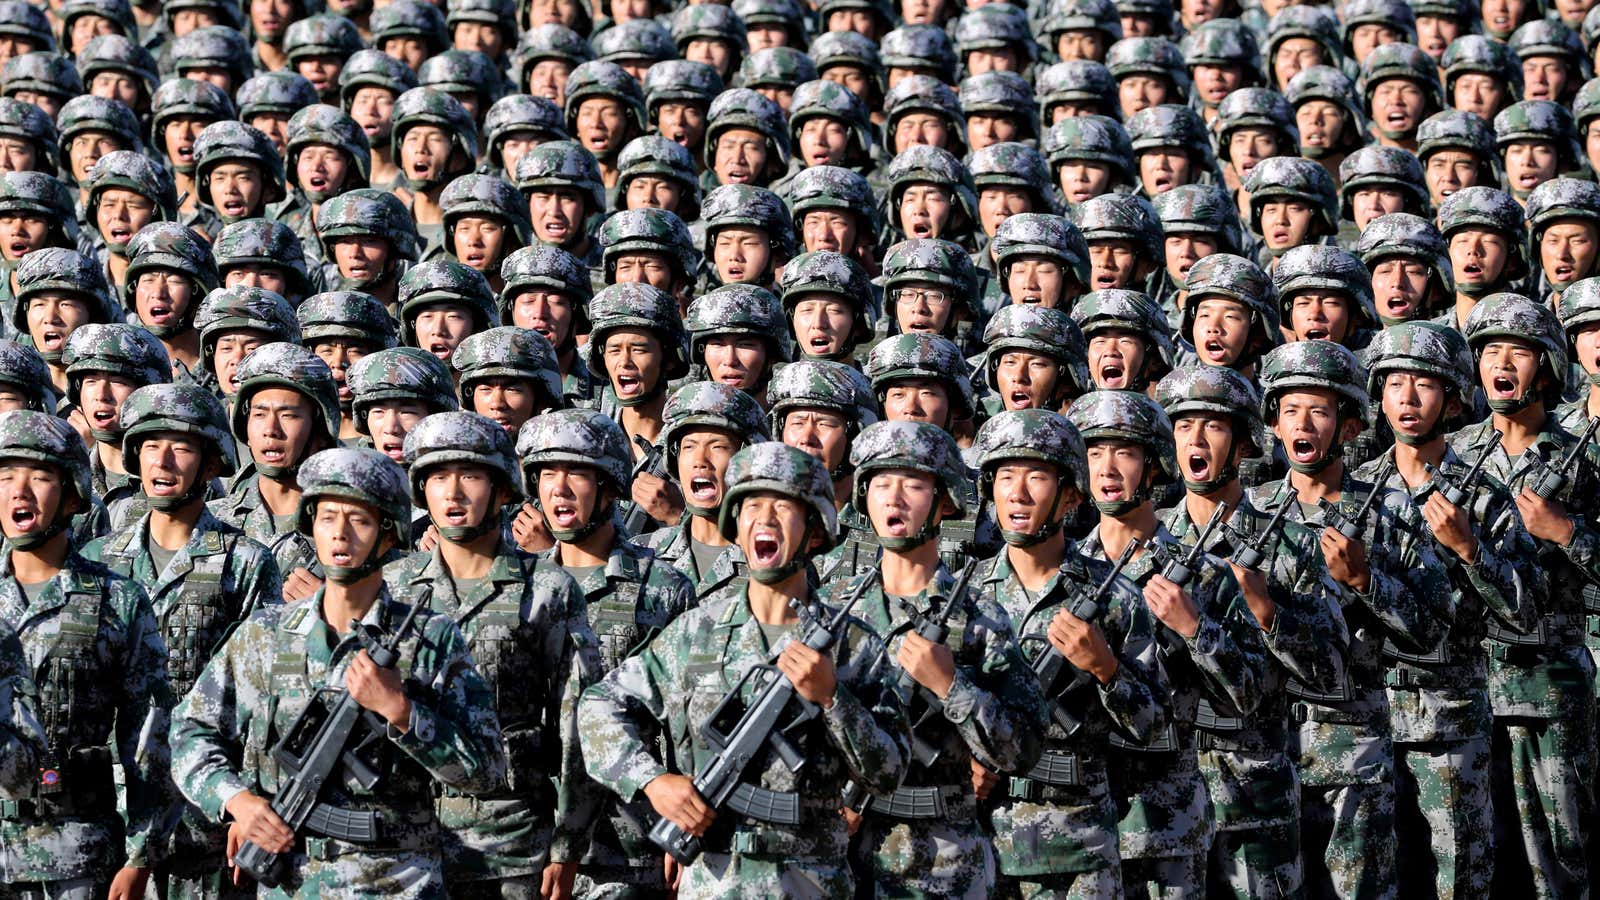 The People’s Liberation Army: loud and clear.